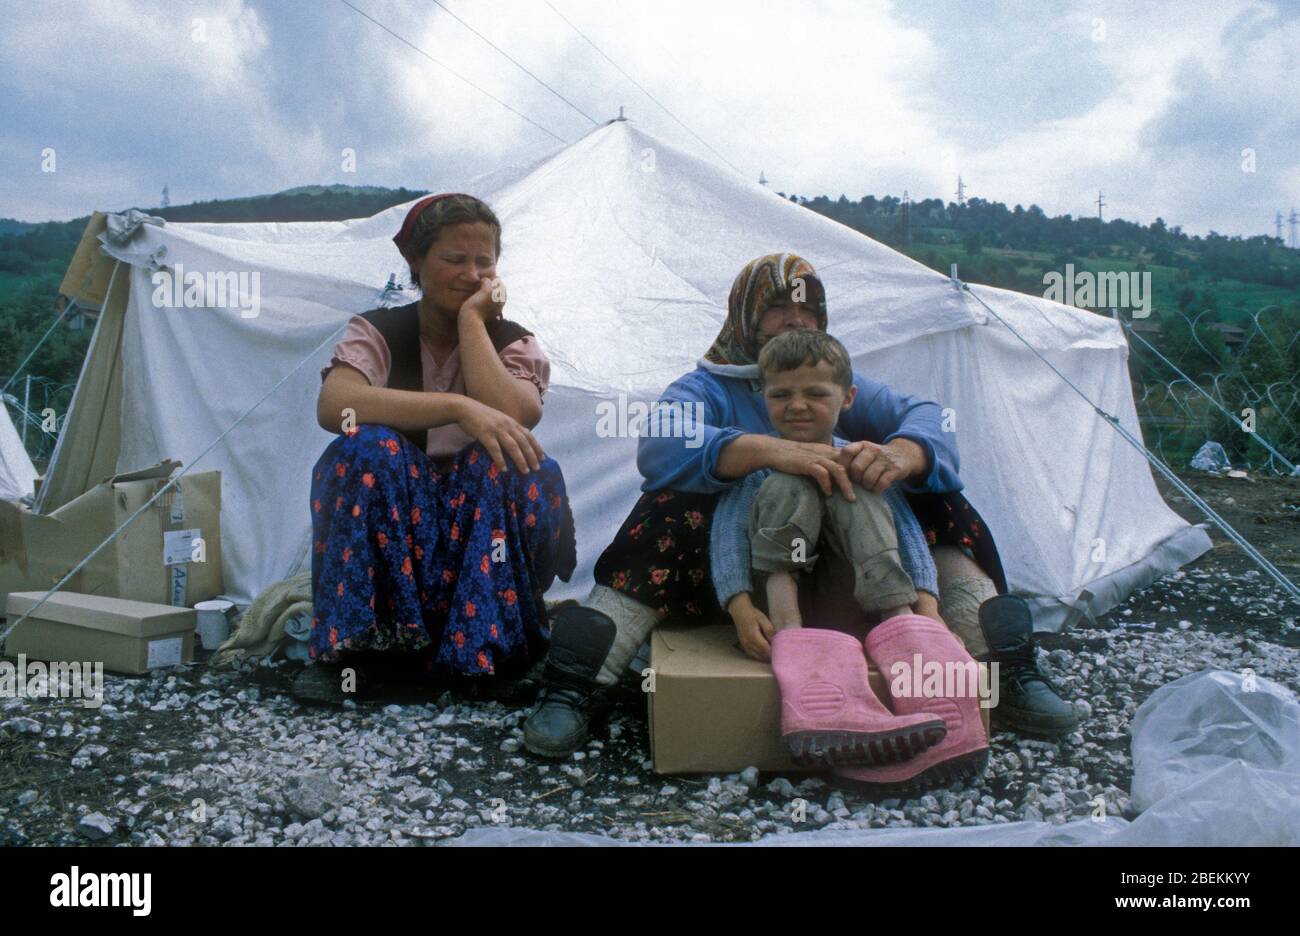 1995 Zenica, Bosnia - grandmother, daughter and child from same family of refugees who fled the fighting in Zenica find refuge in a United Nations temporary refugee camp near Zenica Stock Photo